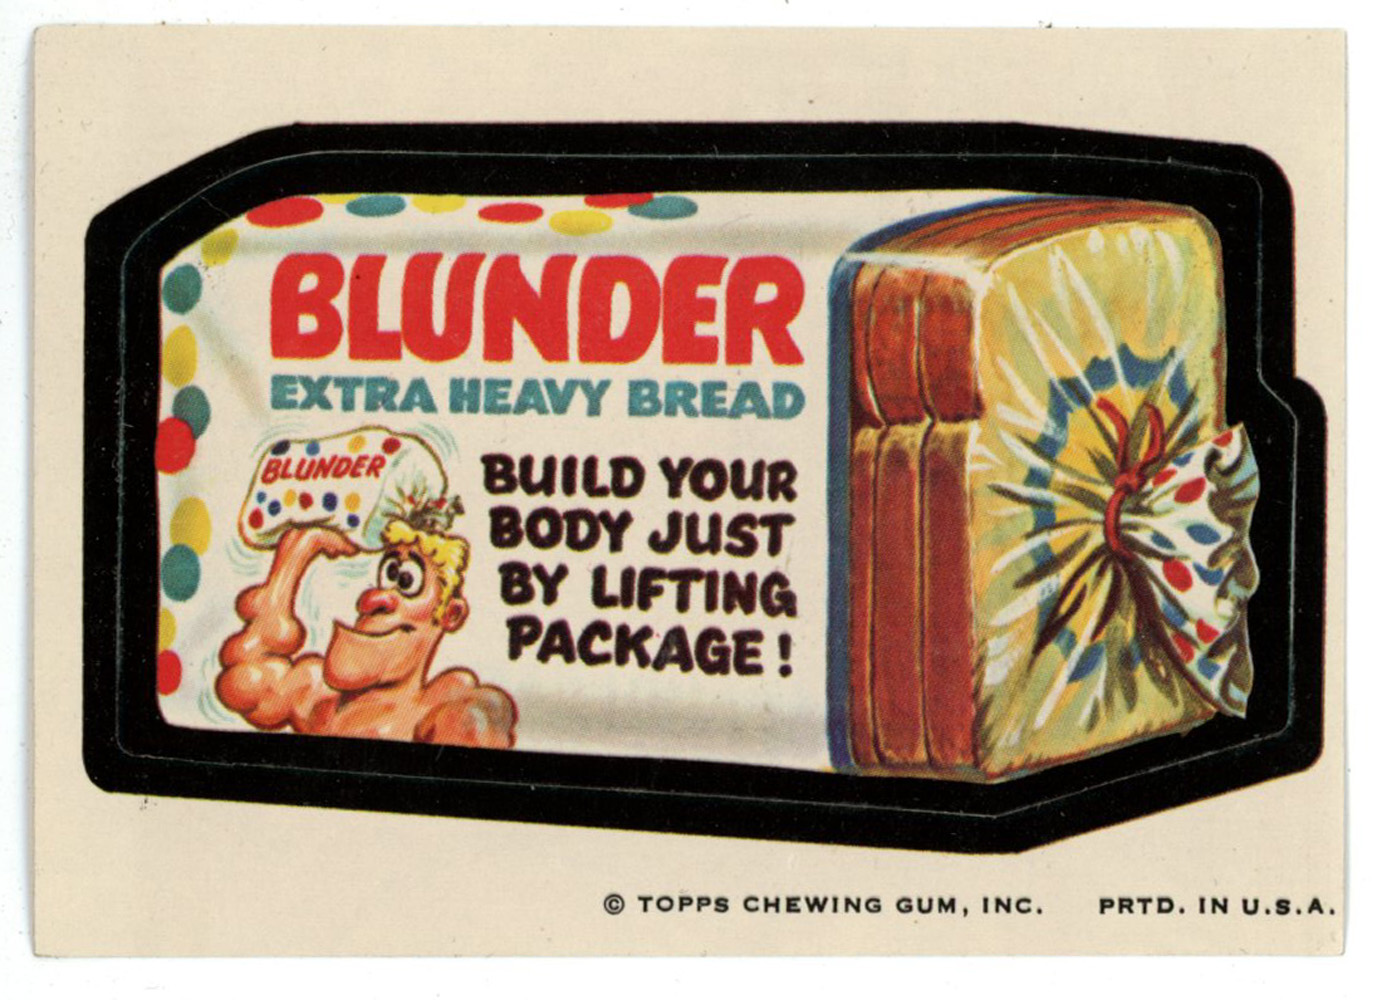 1973 Topps Blunder Bread Series 2 Wacky Packages